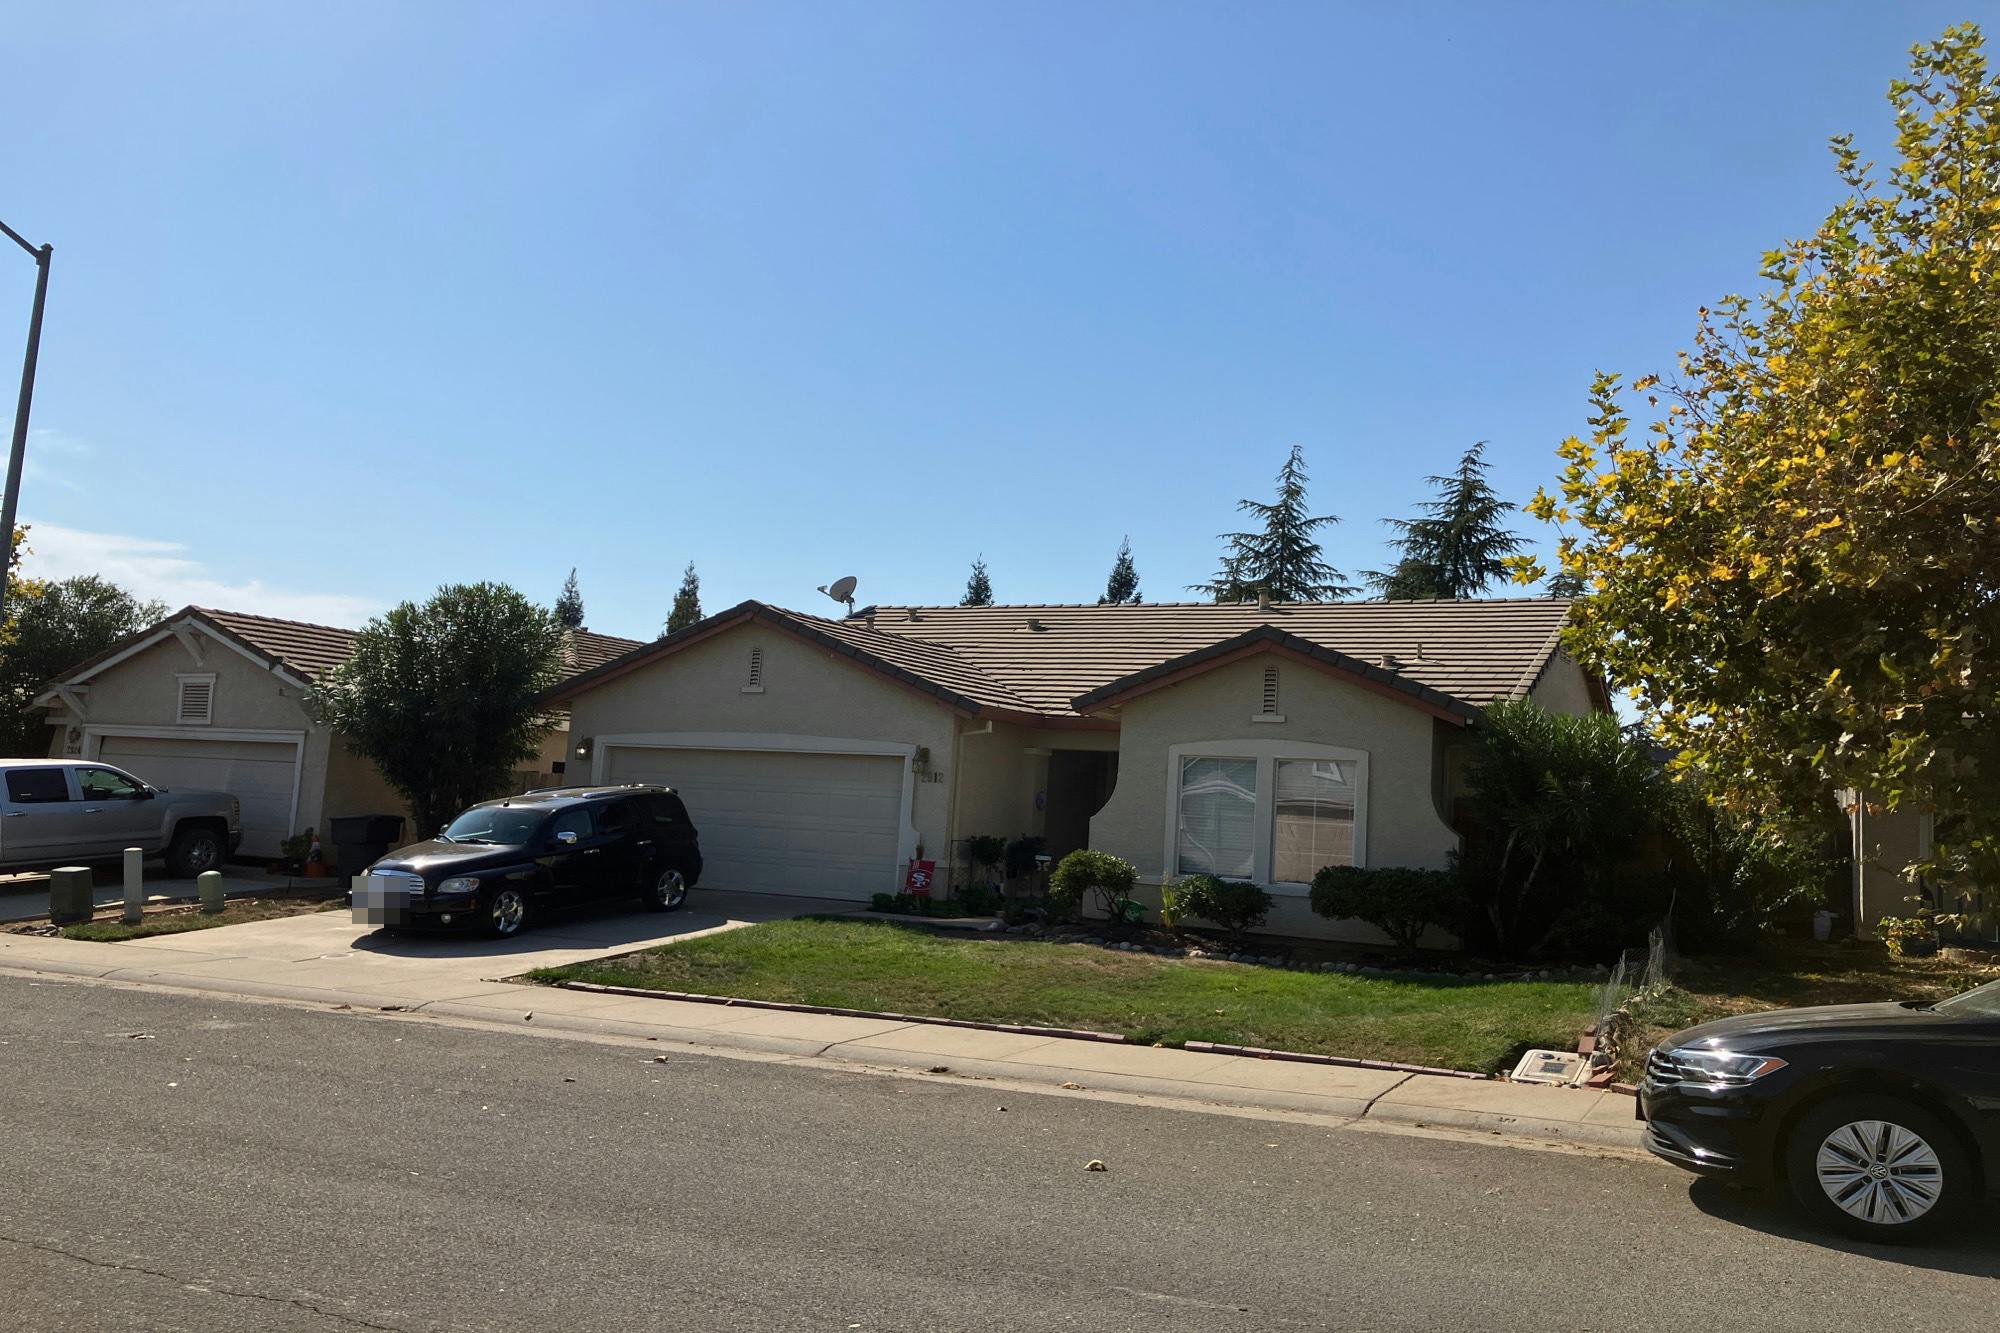 Red Clover Way, Lincoln, CA 95648 #1